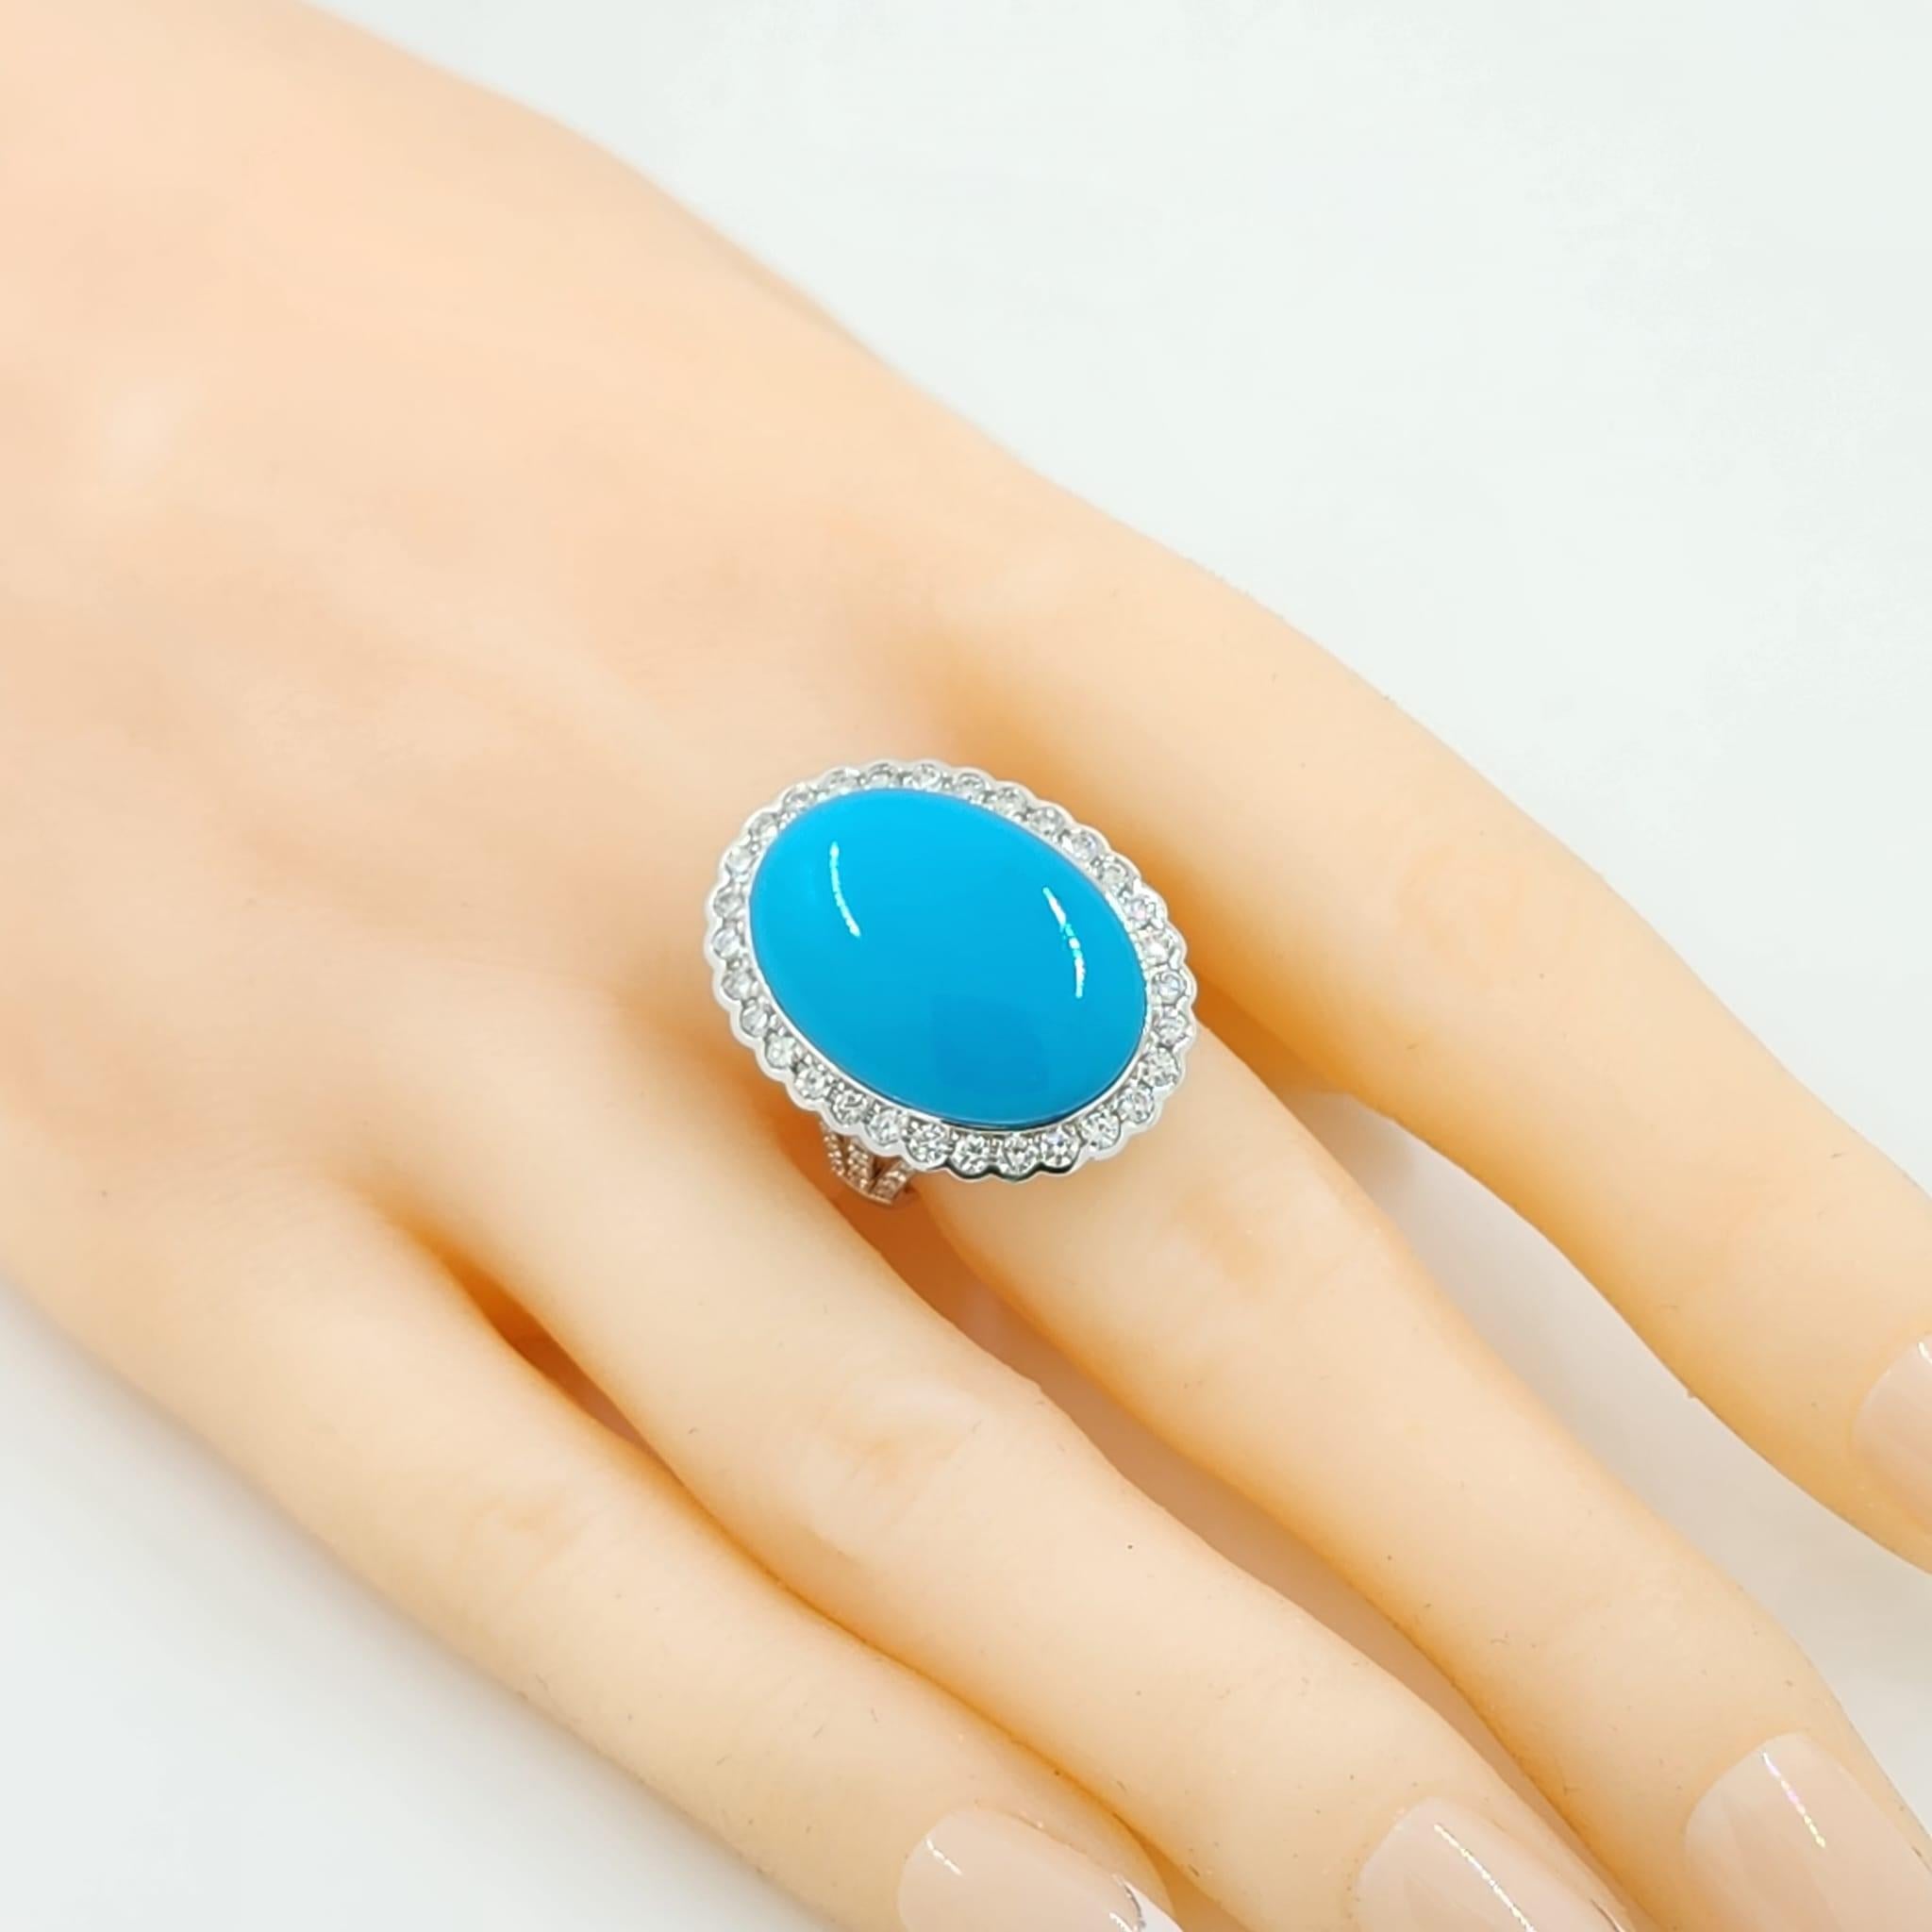 Vintage 11.64 Carat Sleeping Beauty Turquoise Diamond Ring in 14k White Gold In New Condition For Sale In Hong Kong, HK